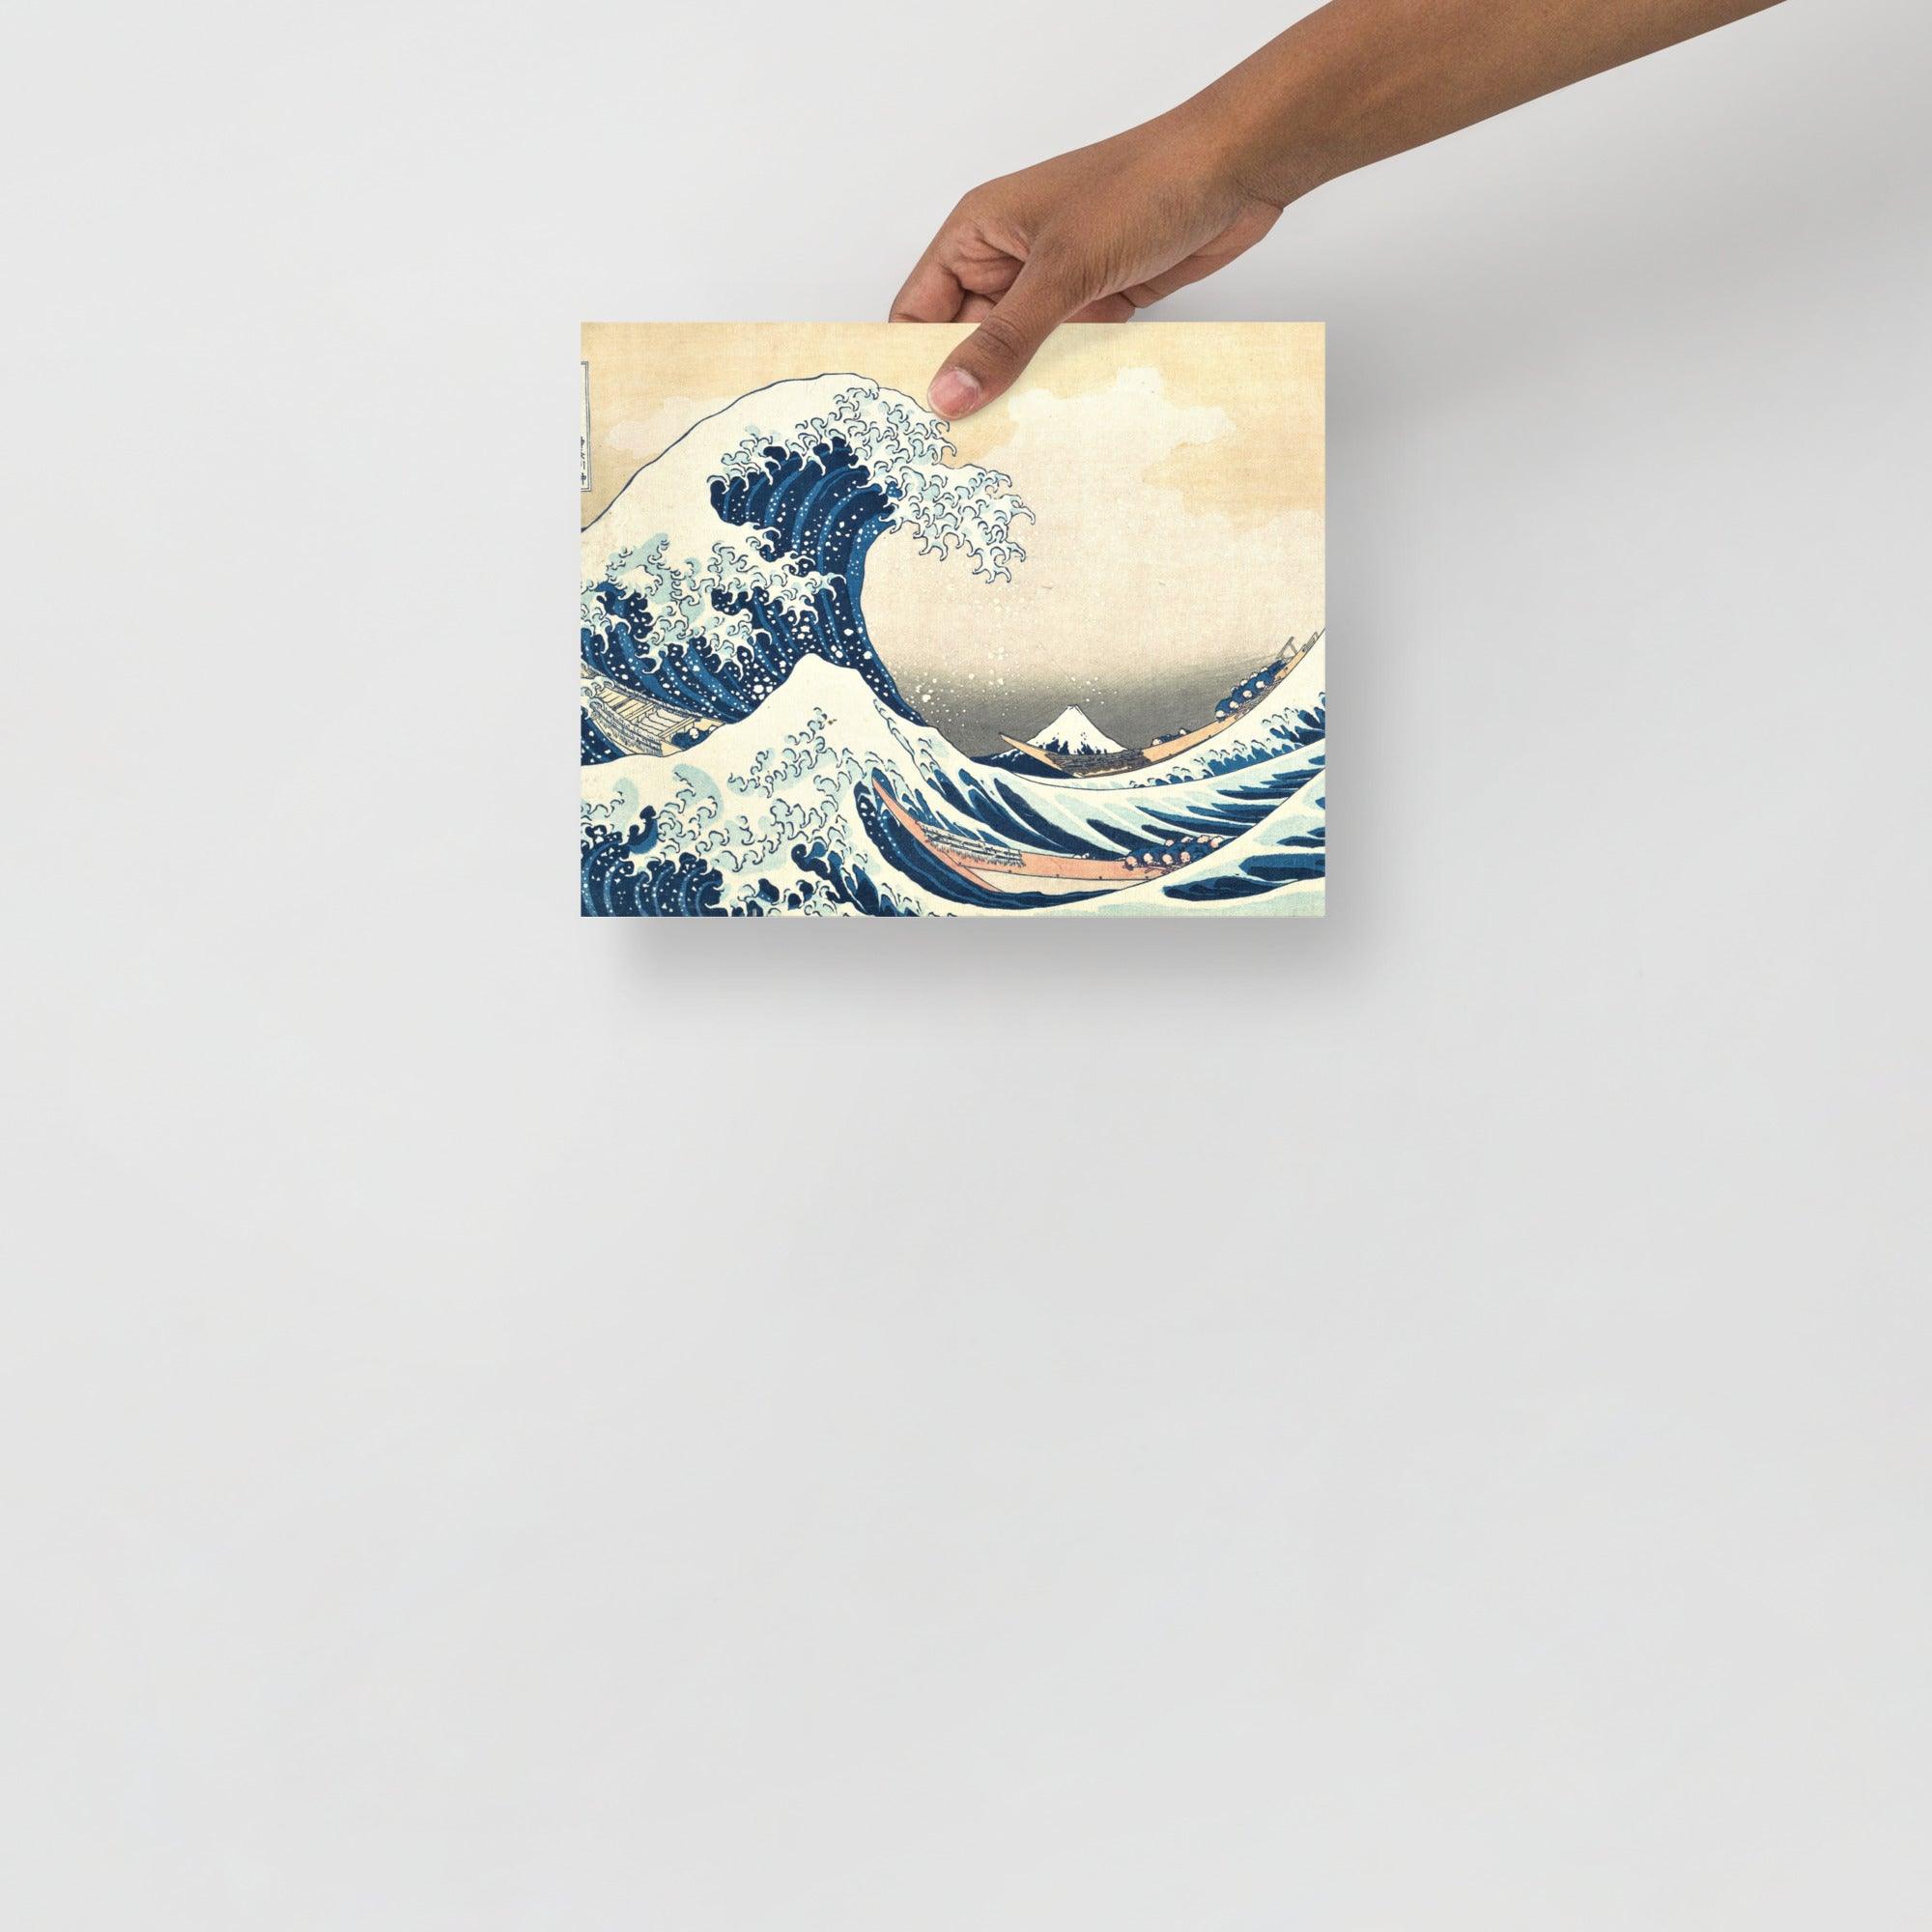 The Great Wave off Kanagawa by Hokusai poster on a plain backdrop in size 8x10”.